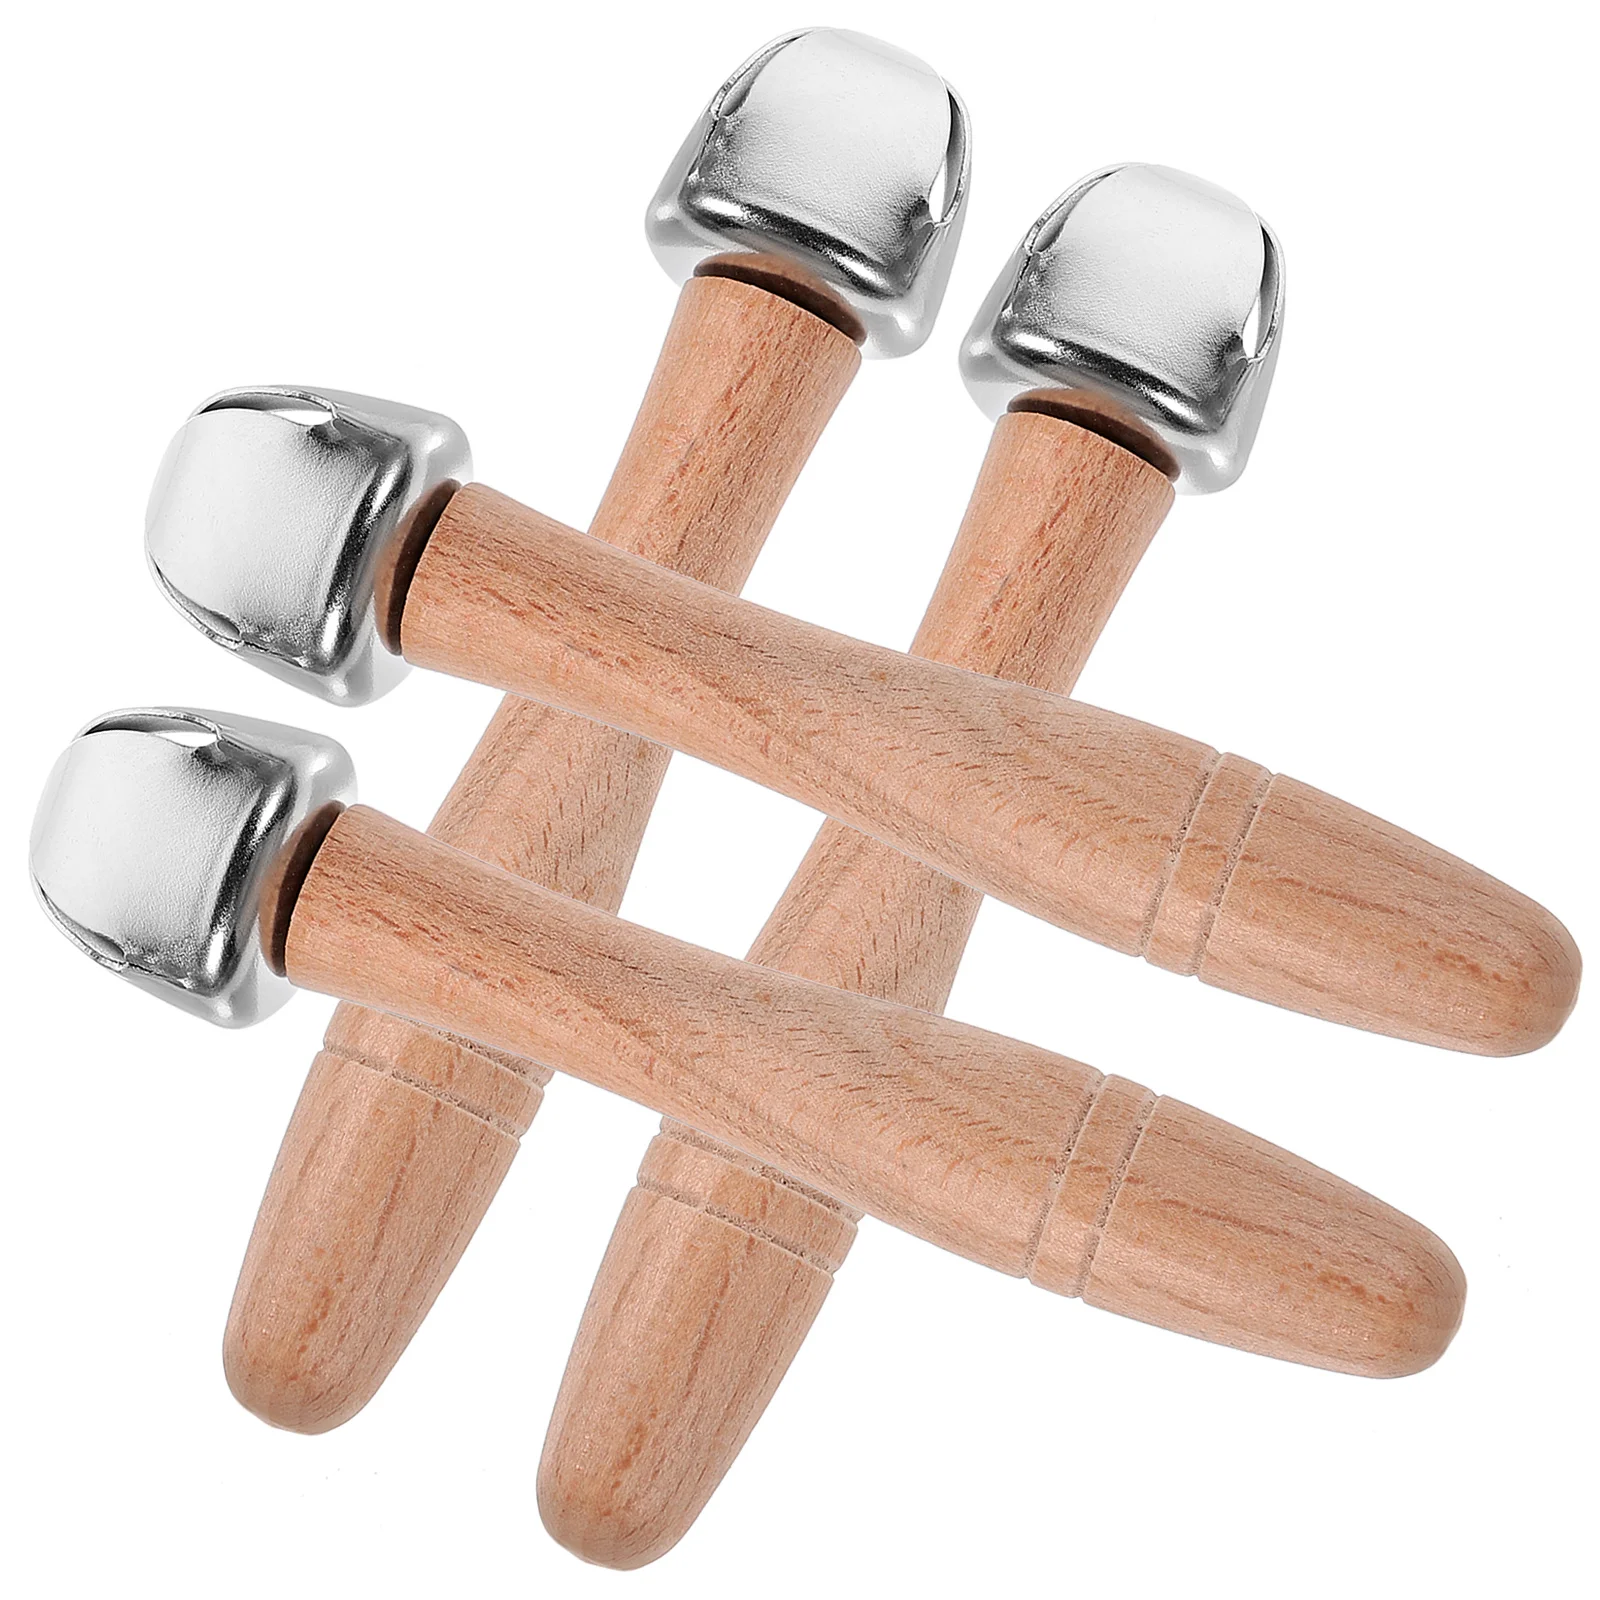 

Wooden Rattles Orff Percussion Musical Instrument Baby Sand Hammer Shaker Toys Early Educational Toys For Children